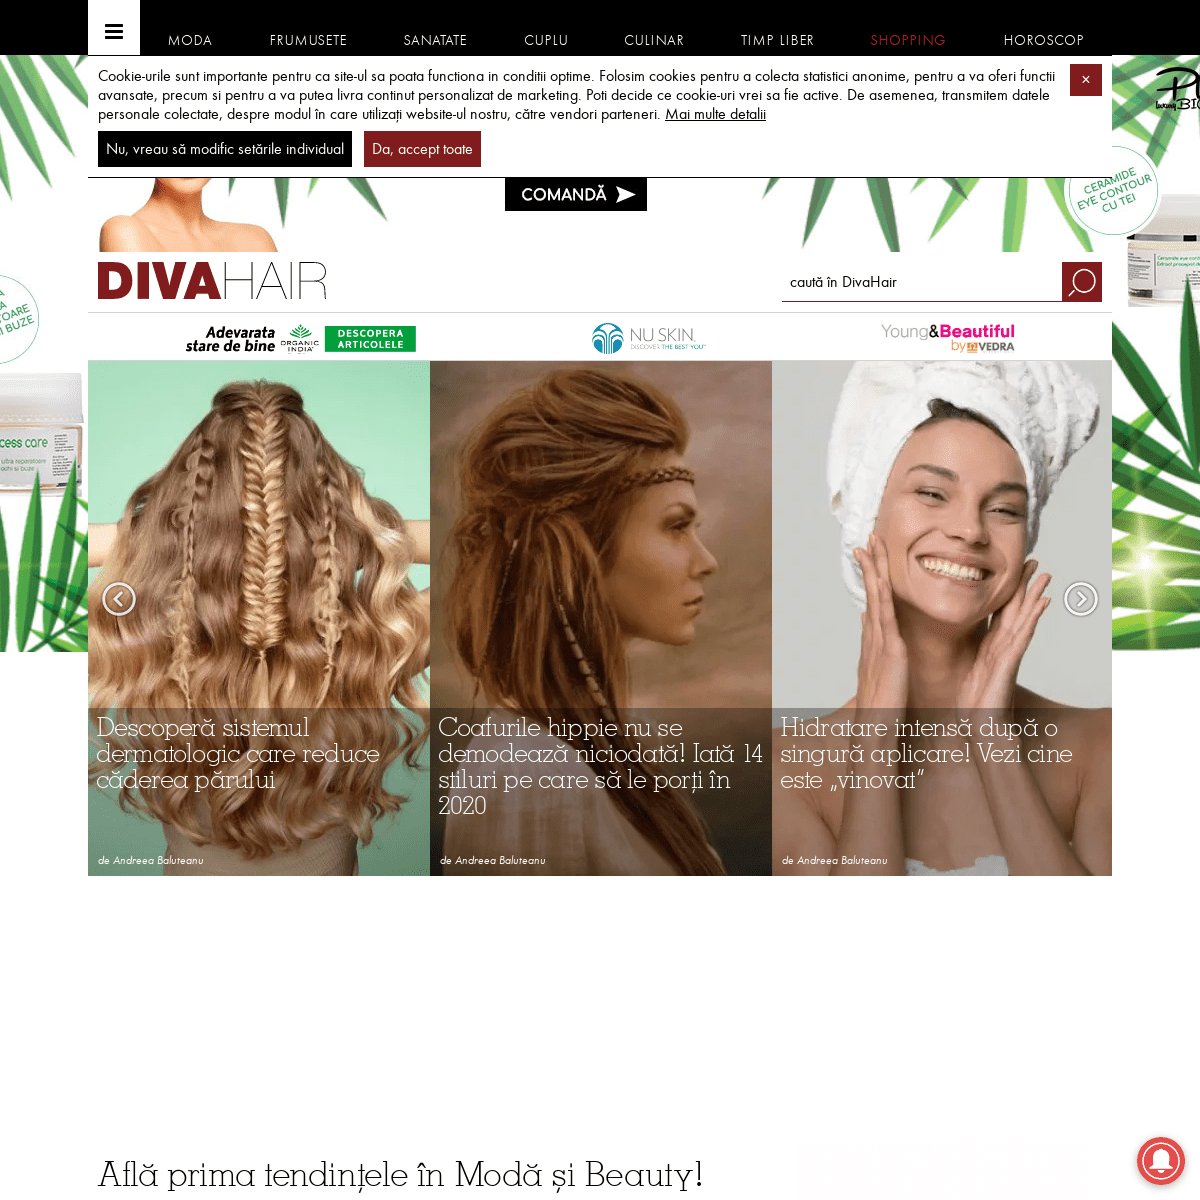 A complete backup of divahair.ro